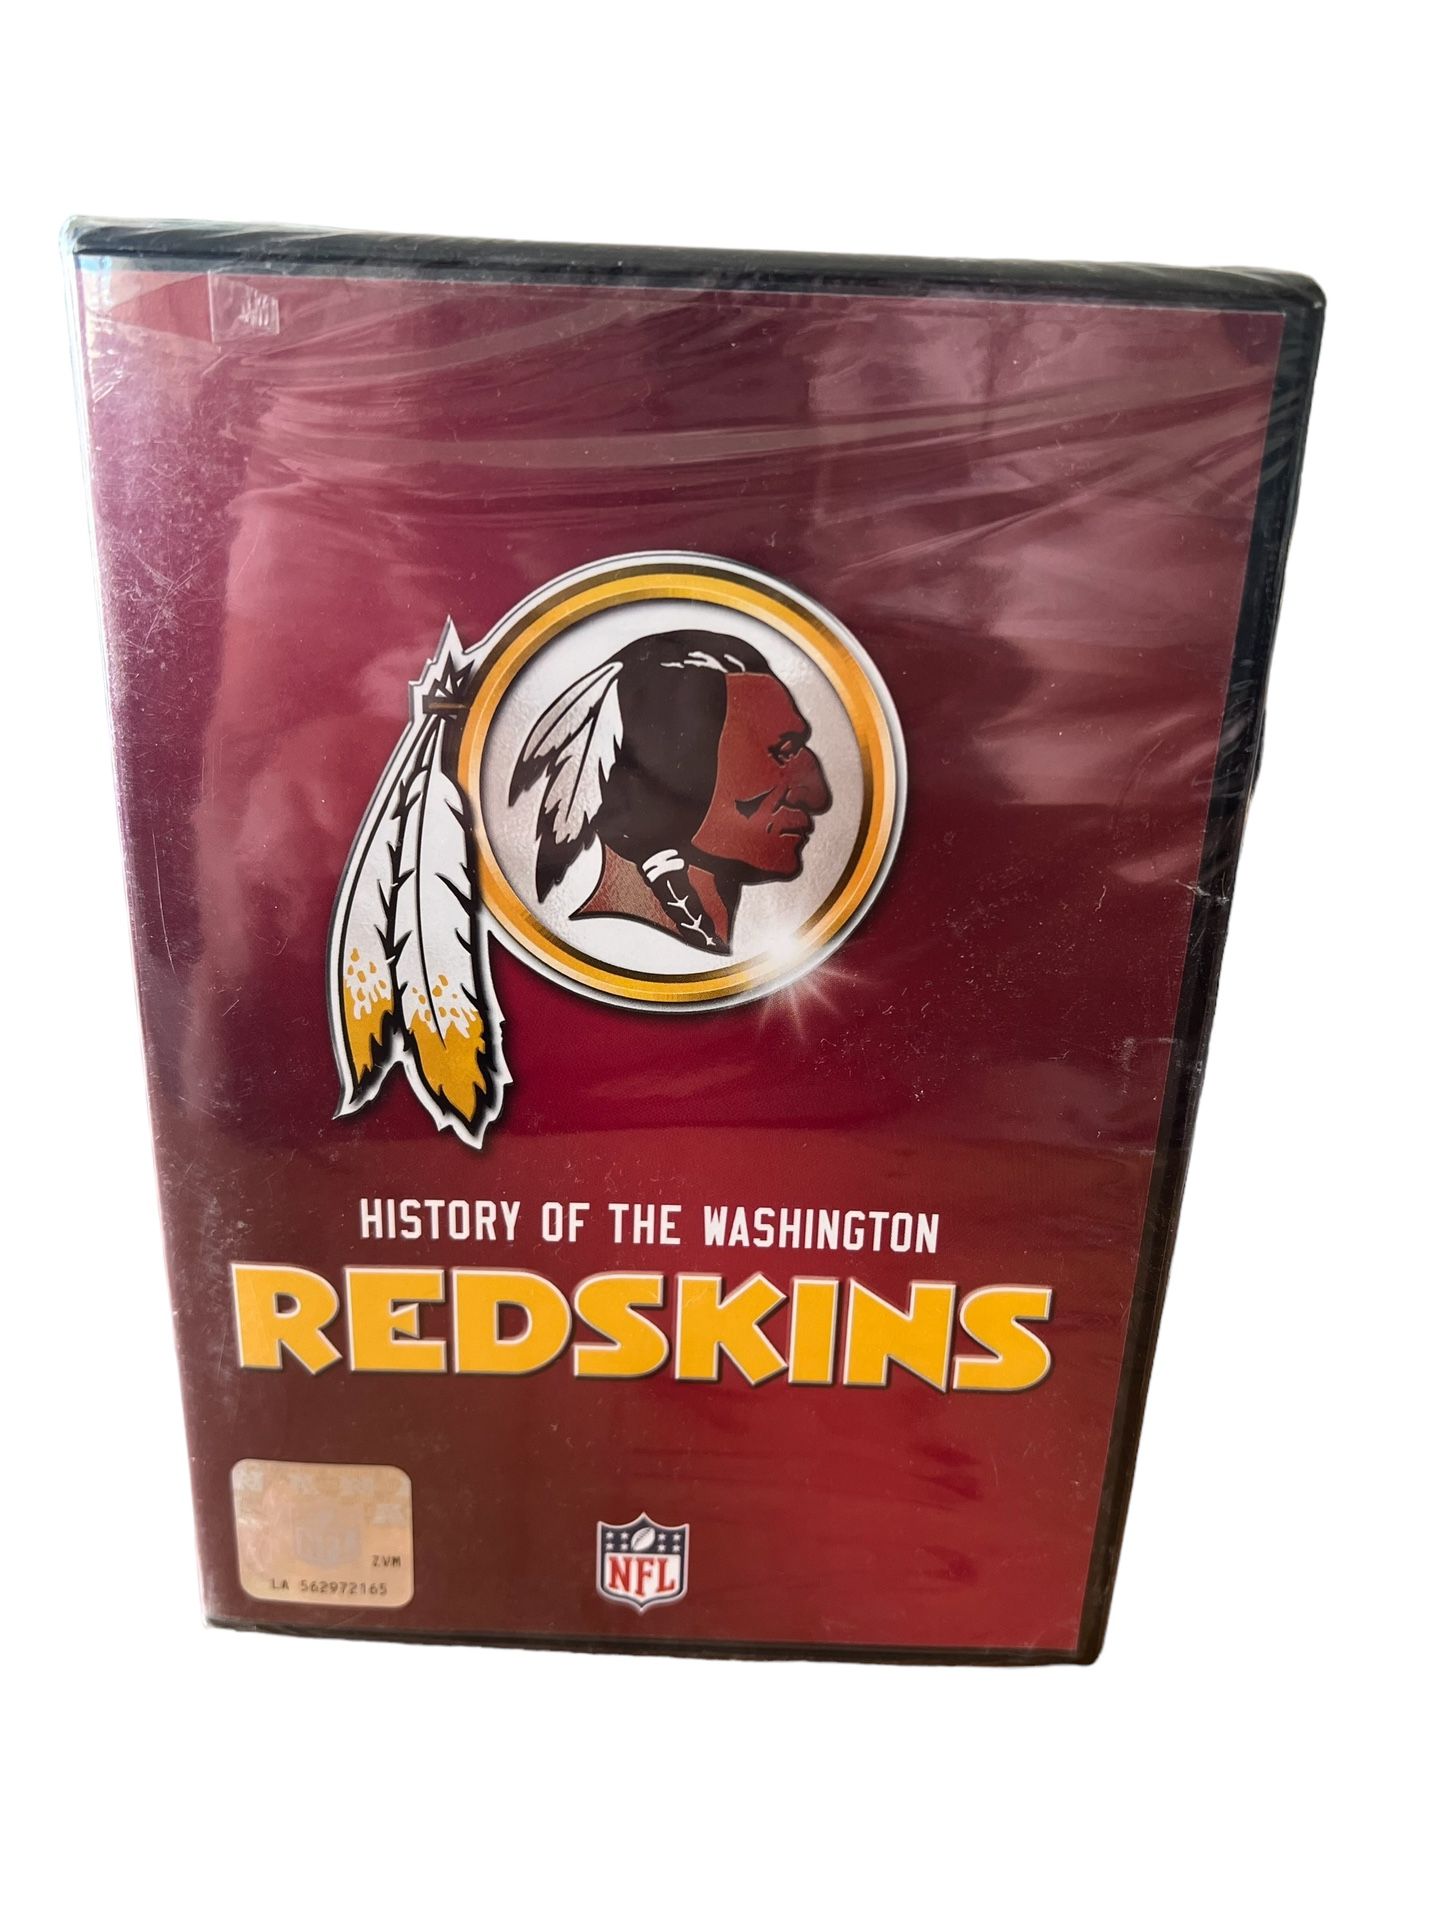 NFL History of the Washington Redskins DVD NEW SEALED Football  Experience the dynamic history of one of the most legendary American football teams wi